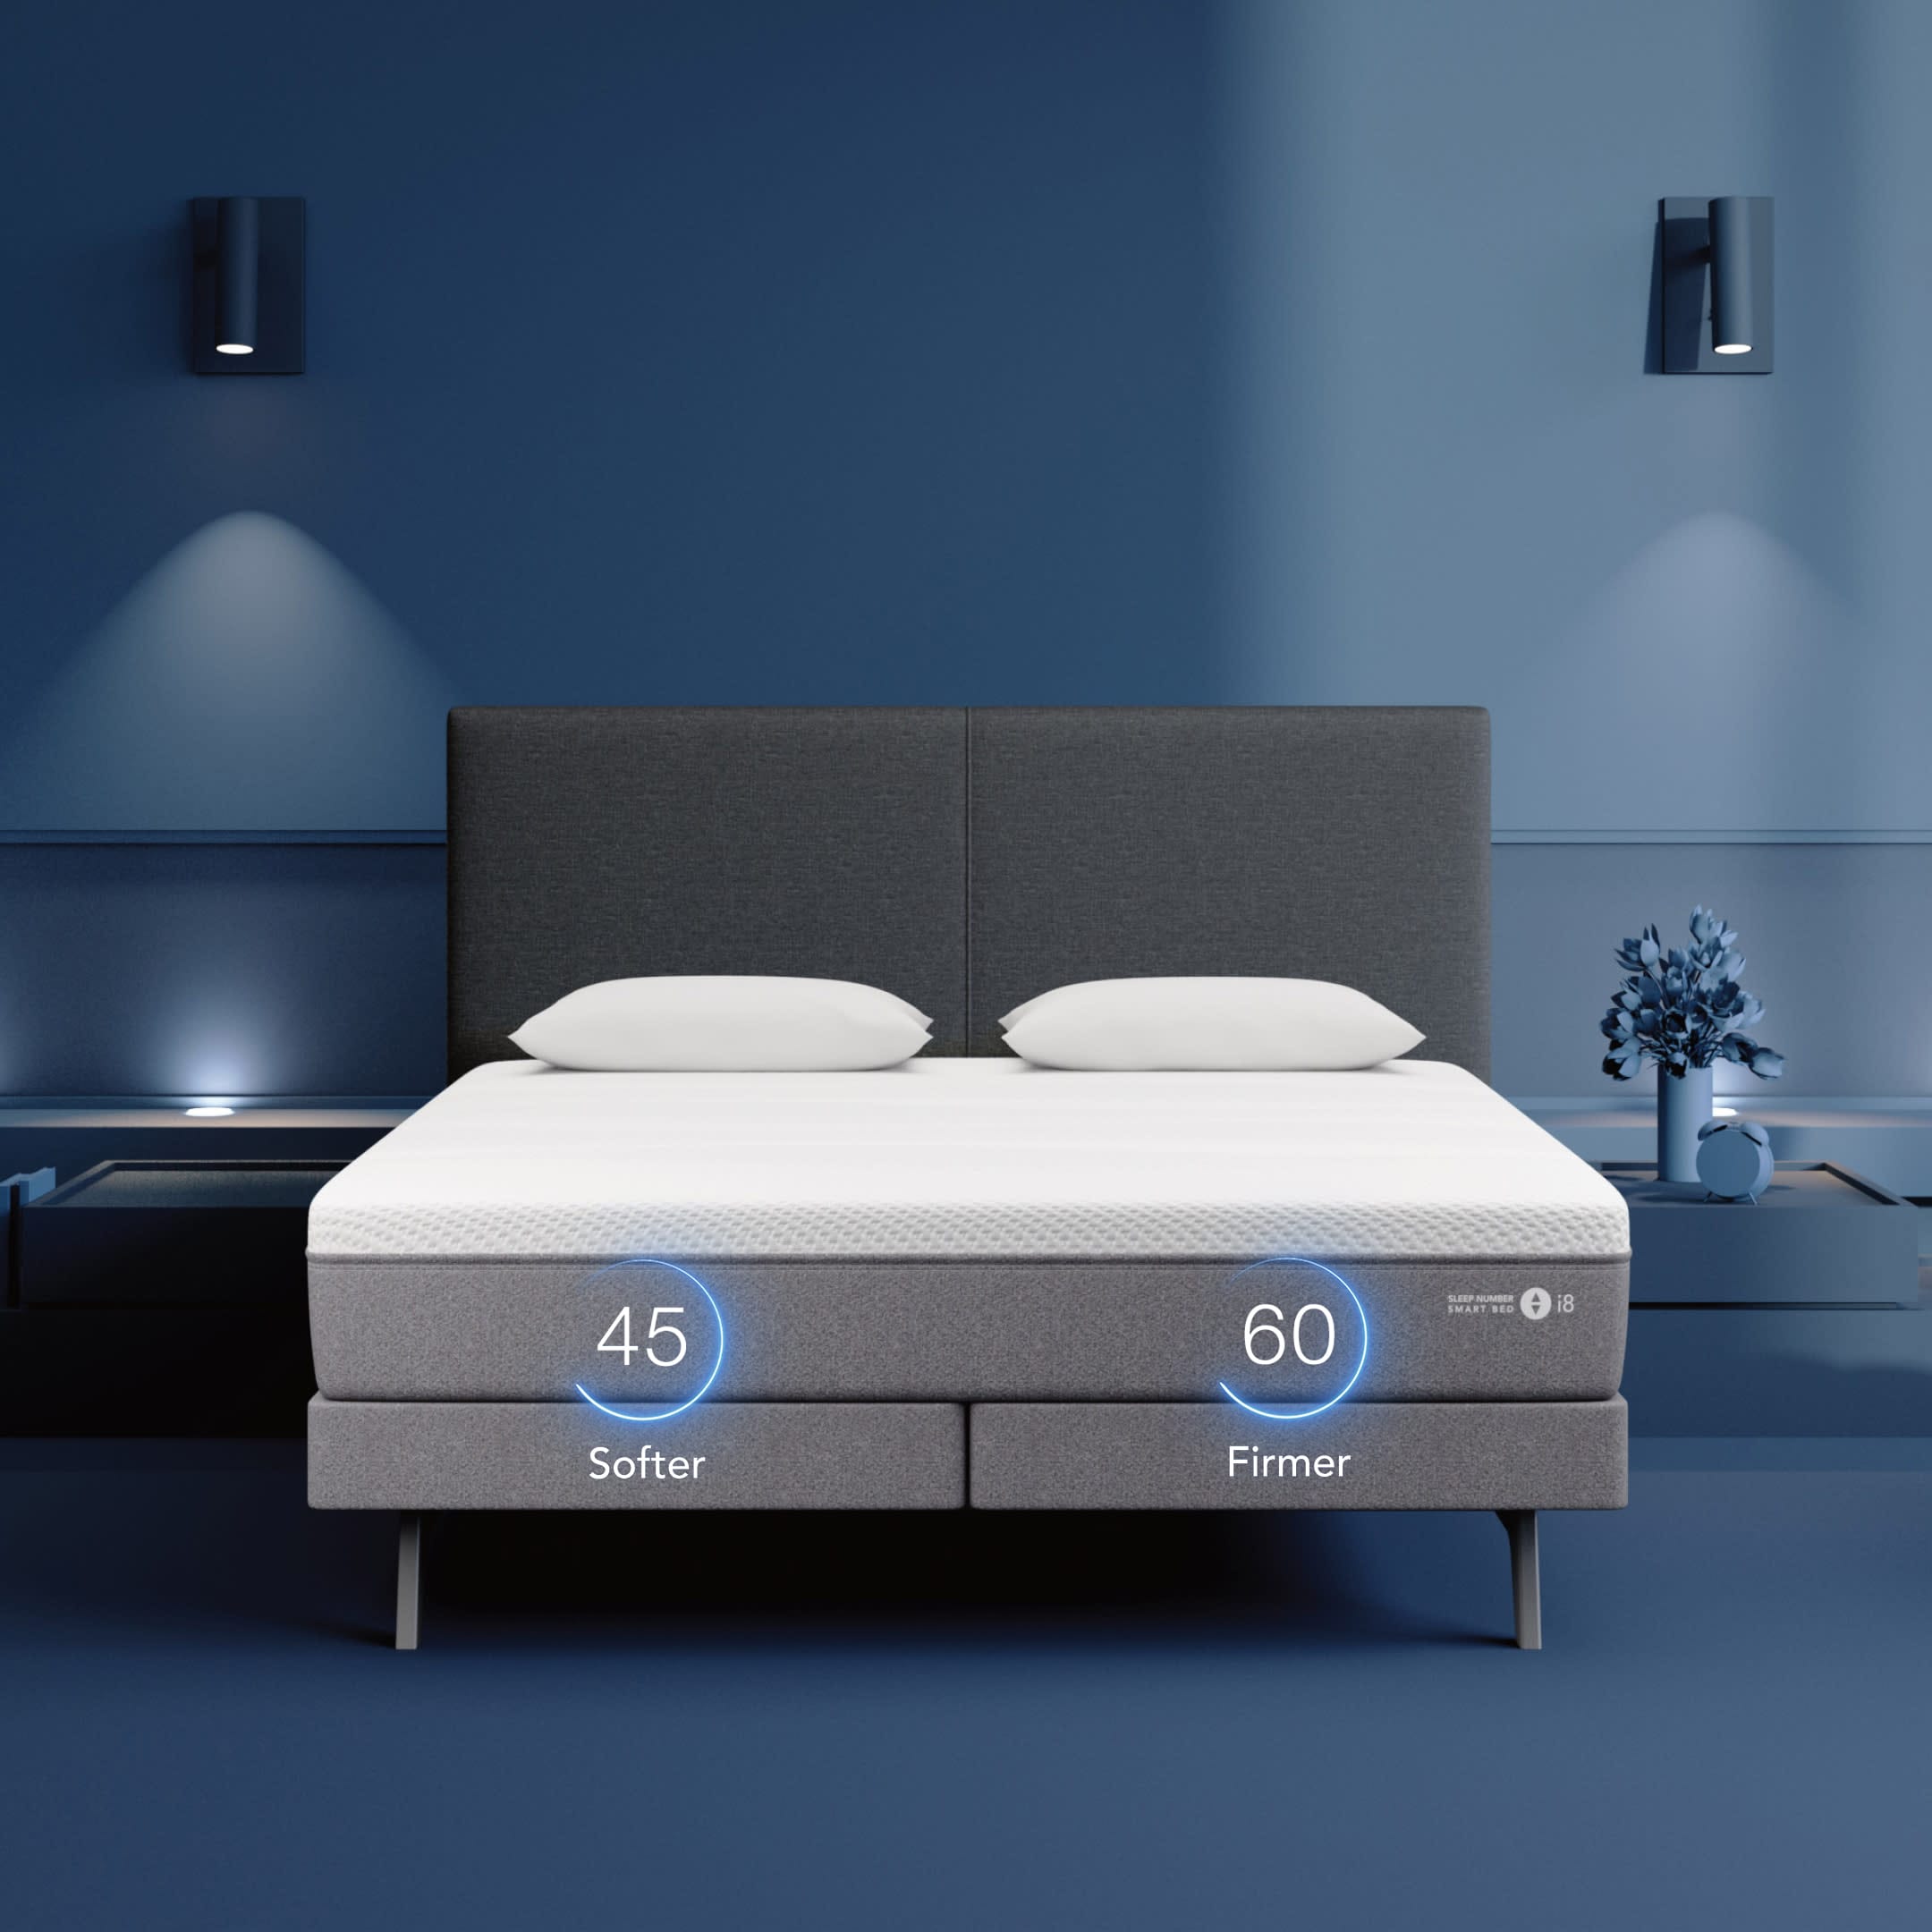 https://cdn.sleepnumber.com/image/upload/f_auto,q_auto:eco/v1695048889/workarea/catalog/product_images/i8/i8_PDP_Gallery_Front_Numbers